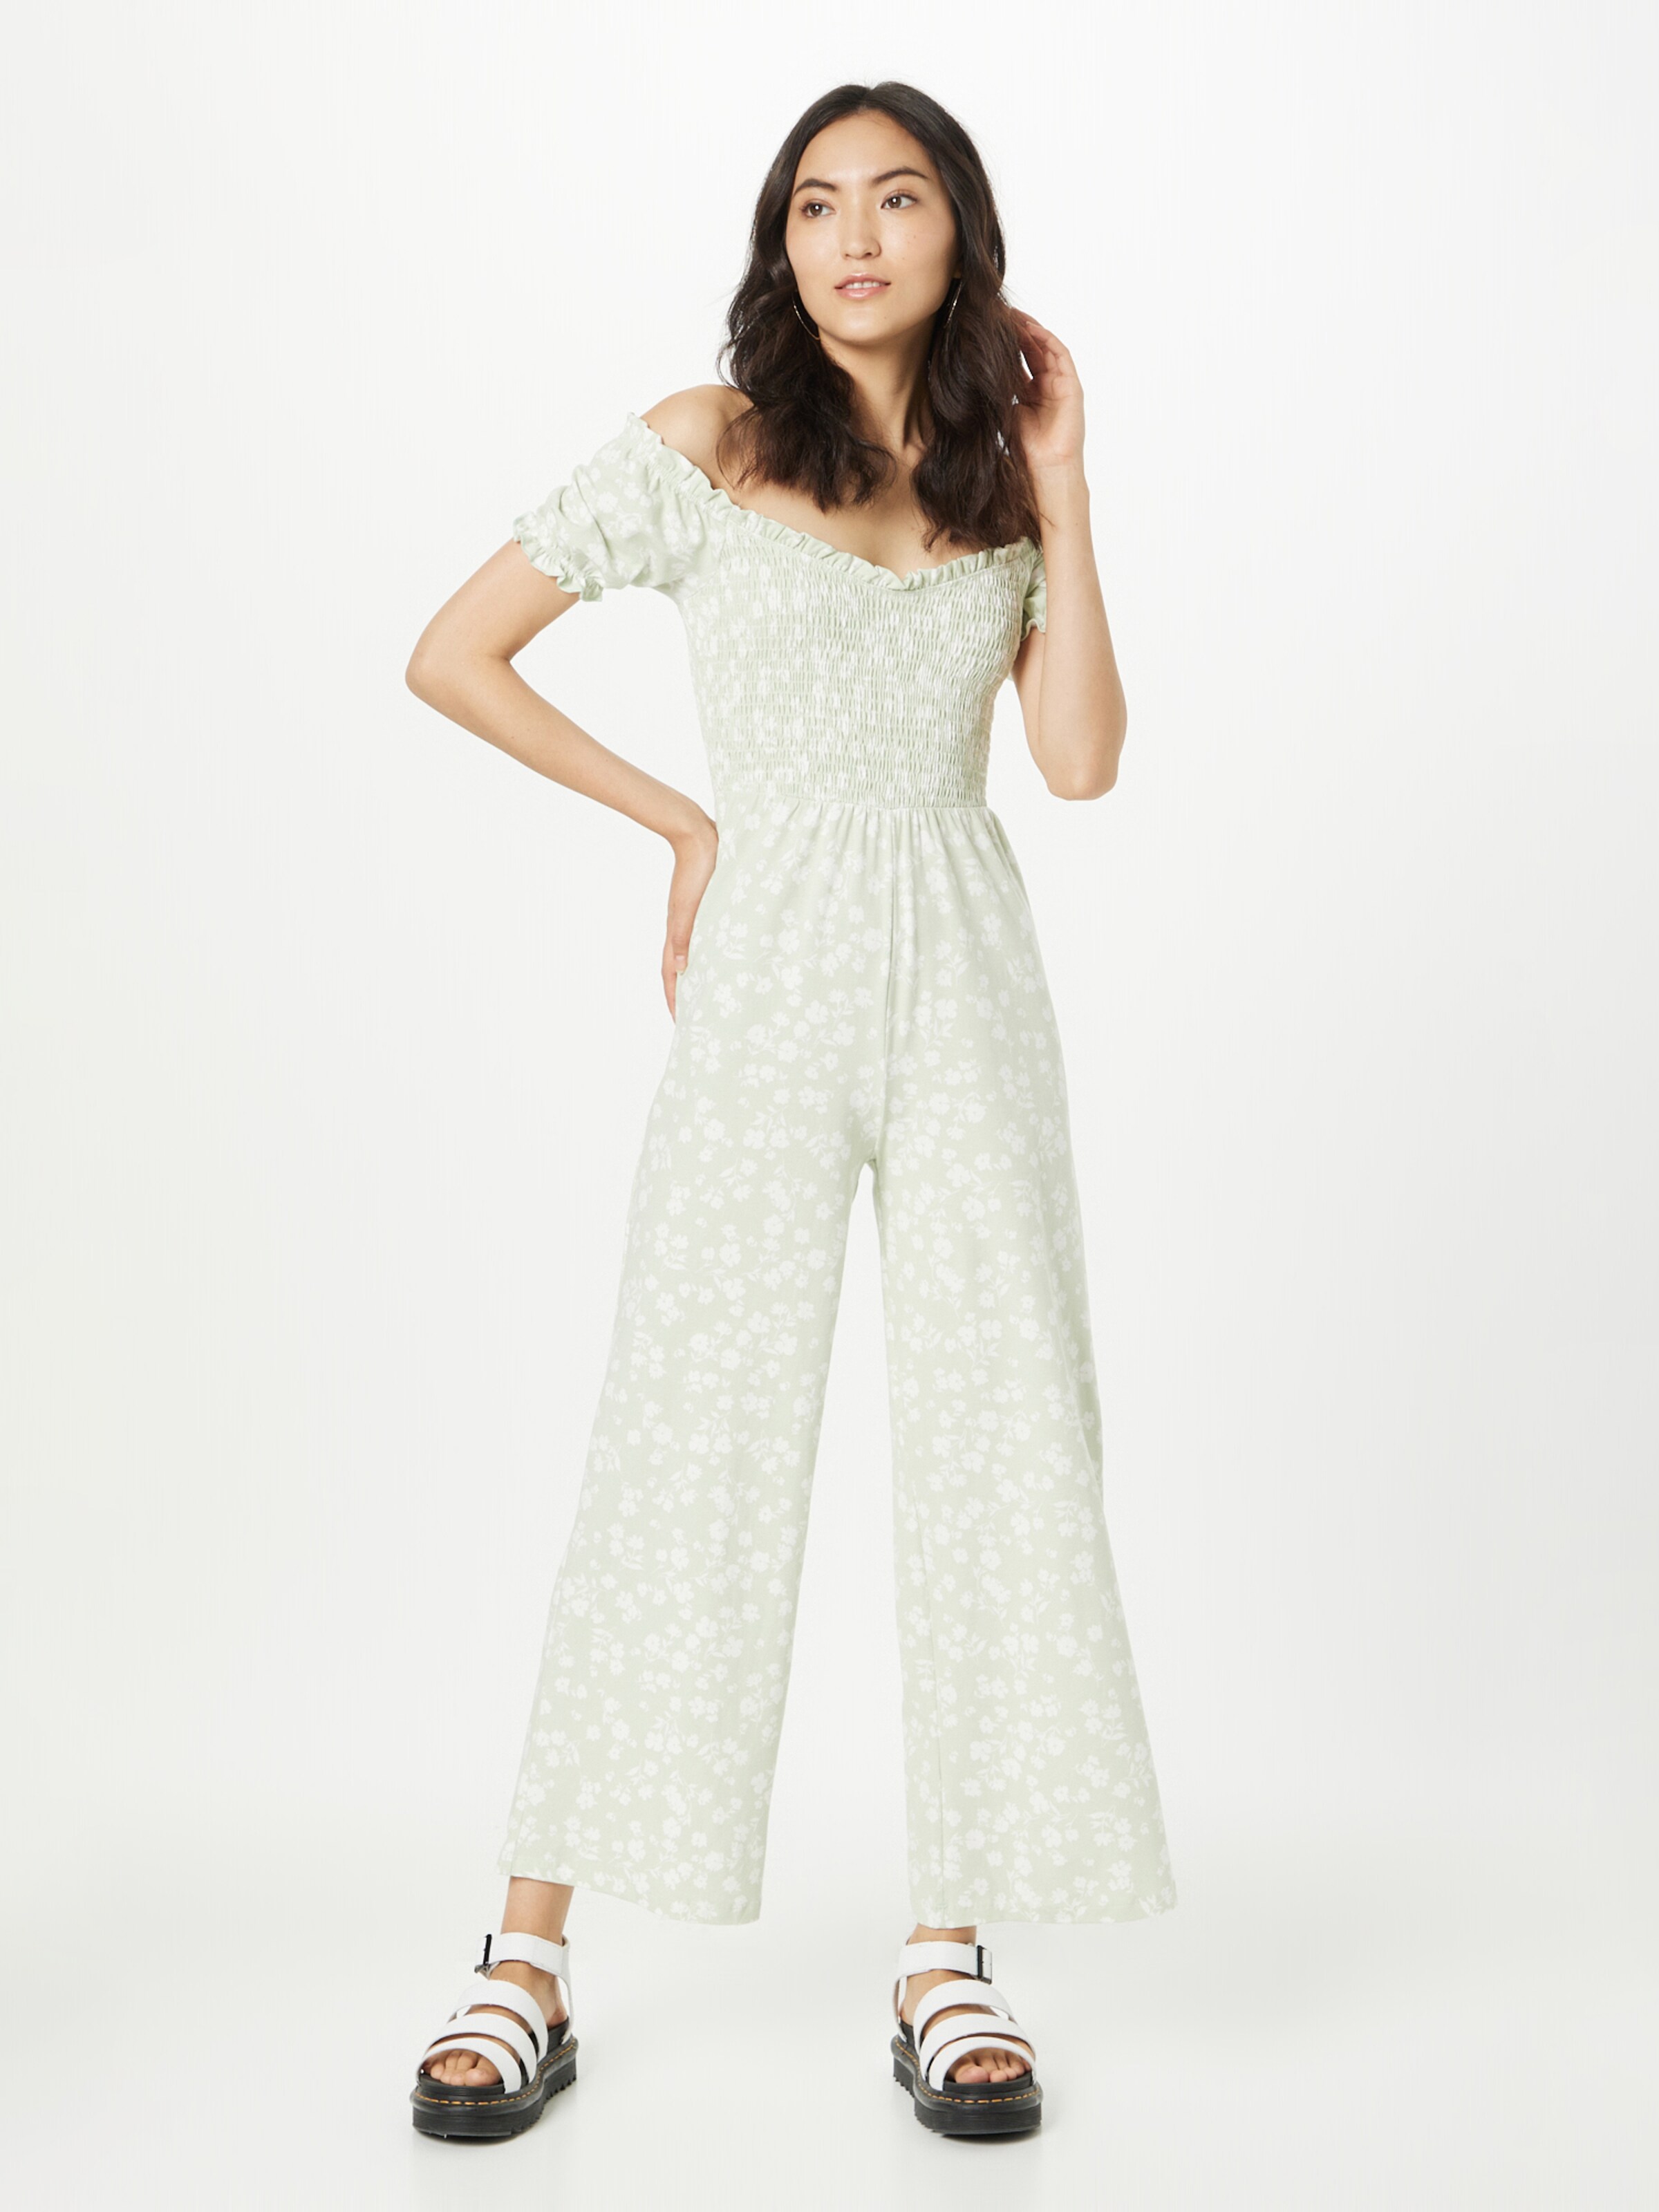 Shop Women's Dorothy Perkins Ruffle Jumpsuits up to 80% Off | DealDoodle